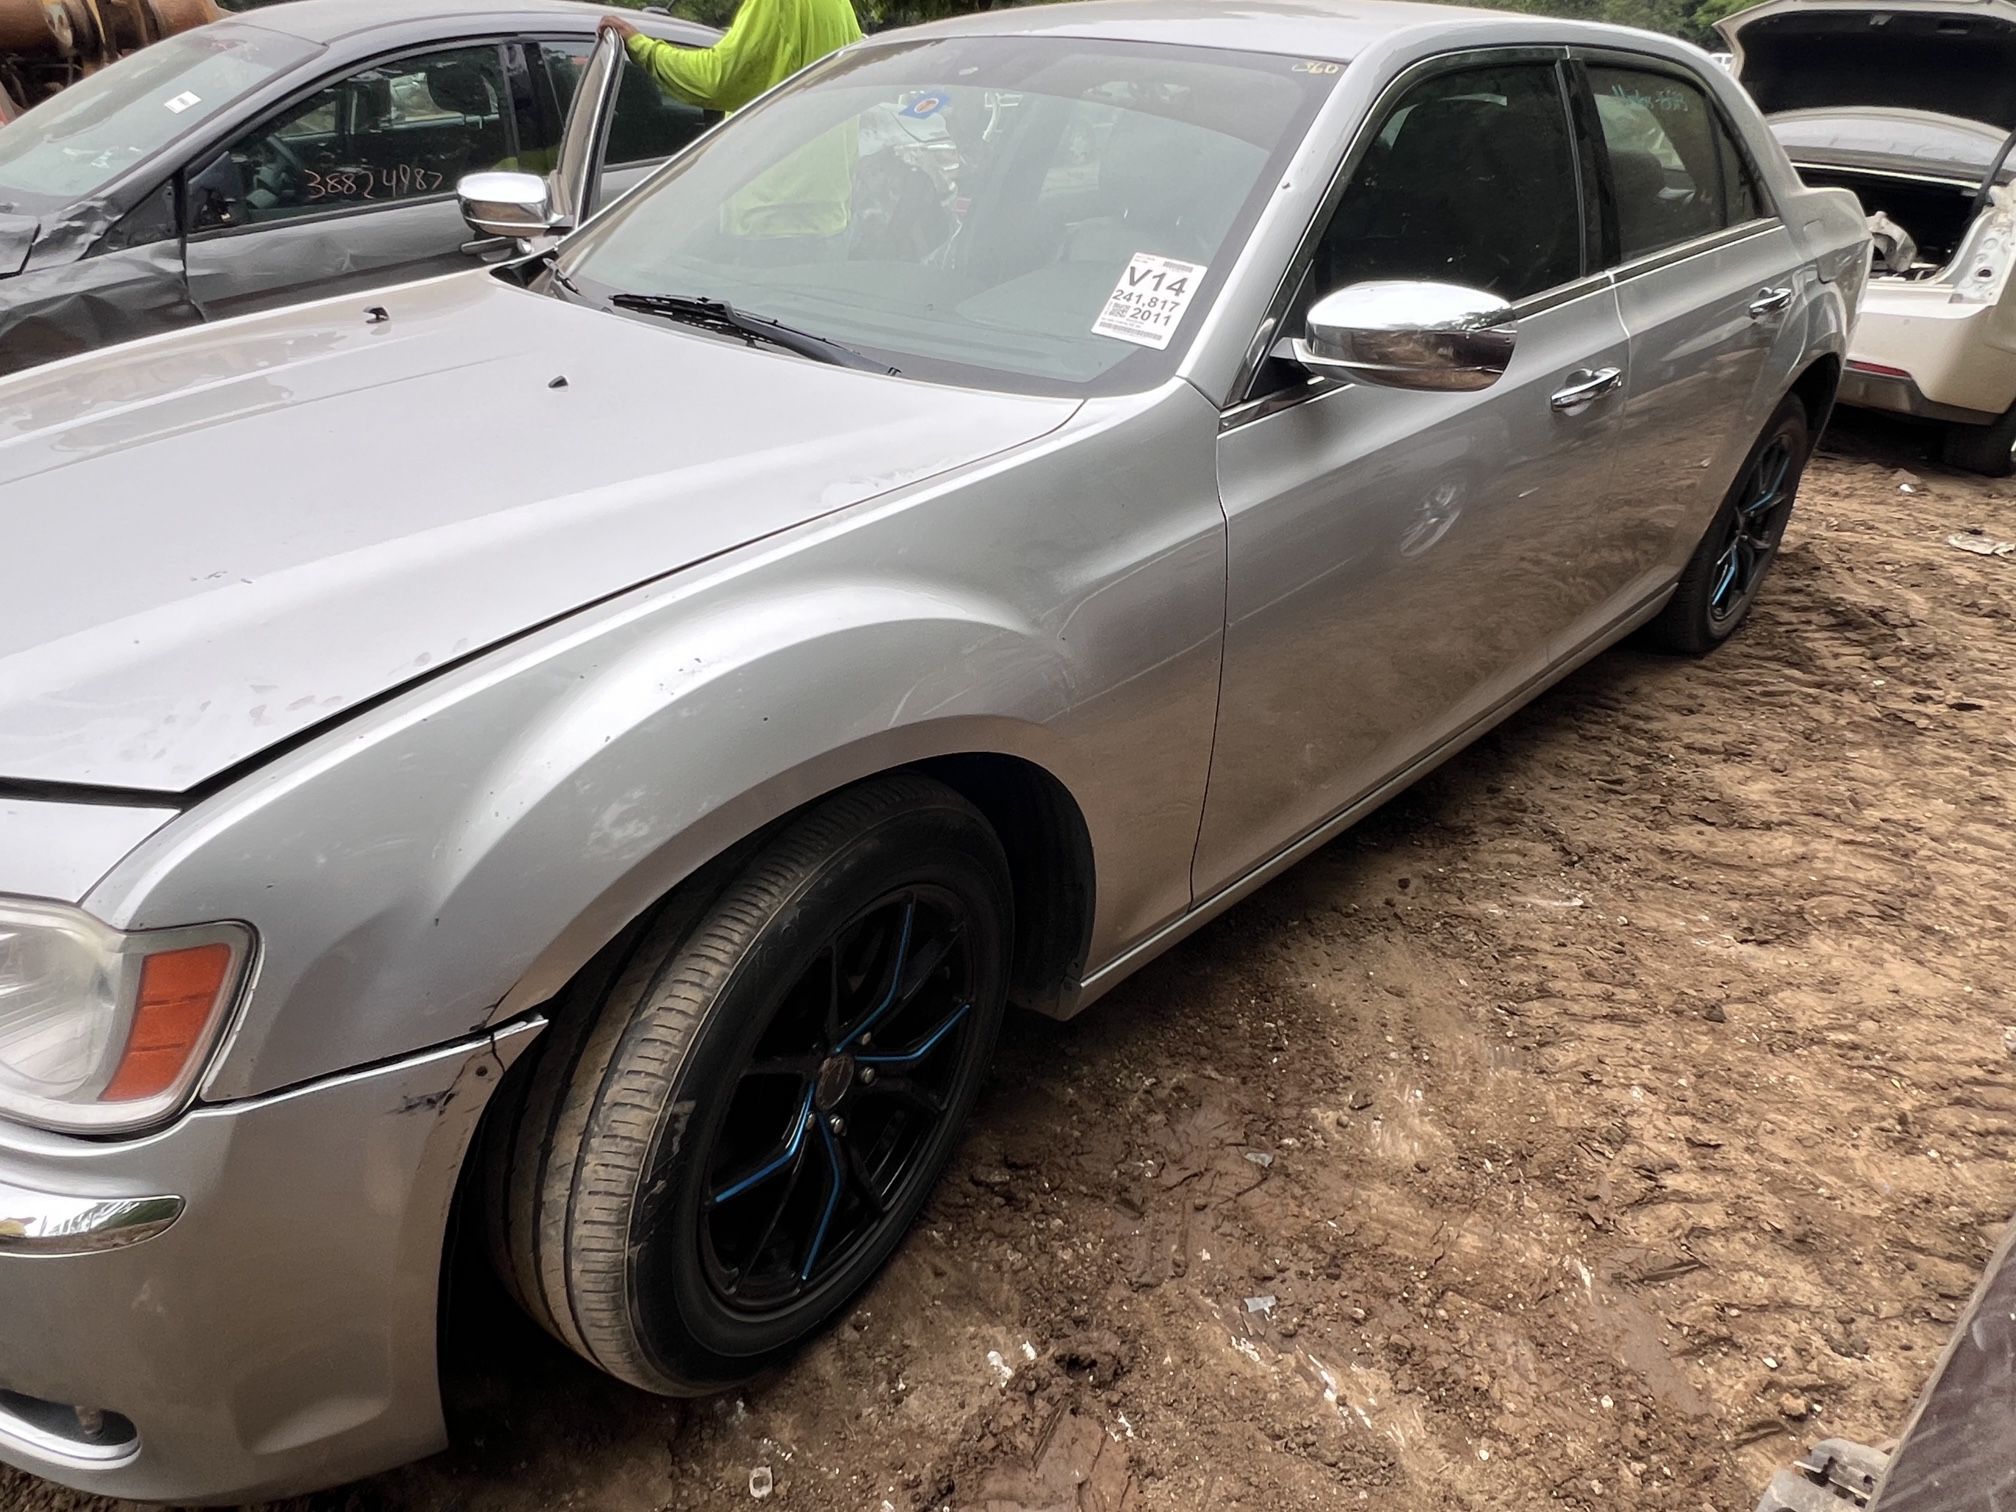 2011 Chrysler 300 - Parts Only #DC5